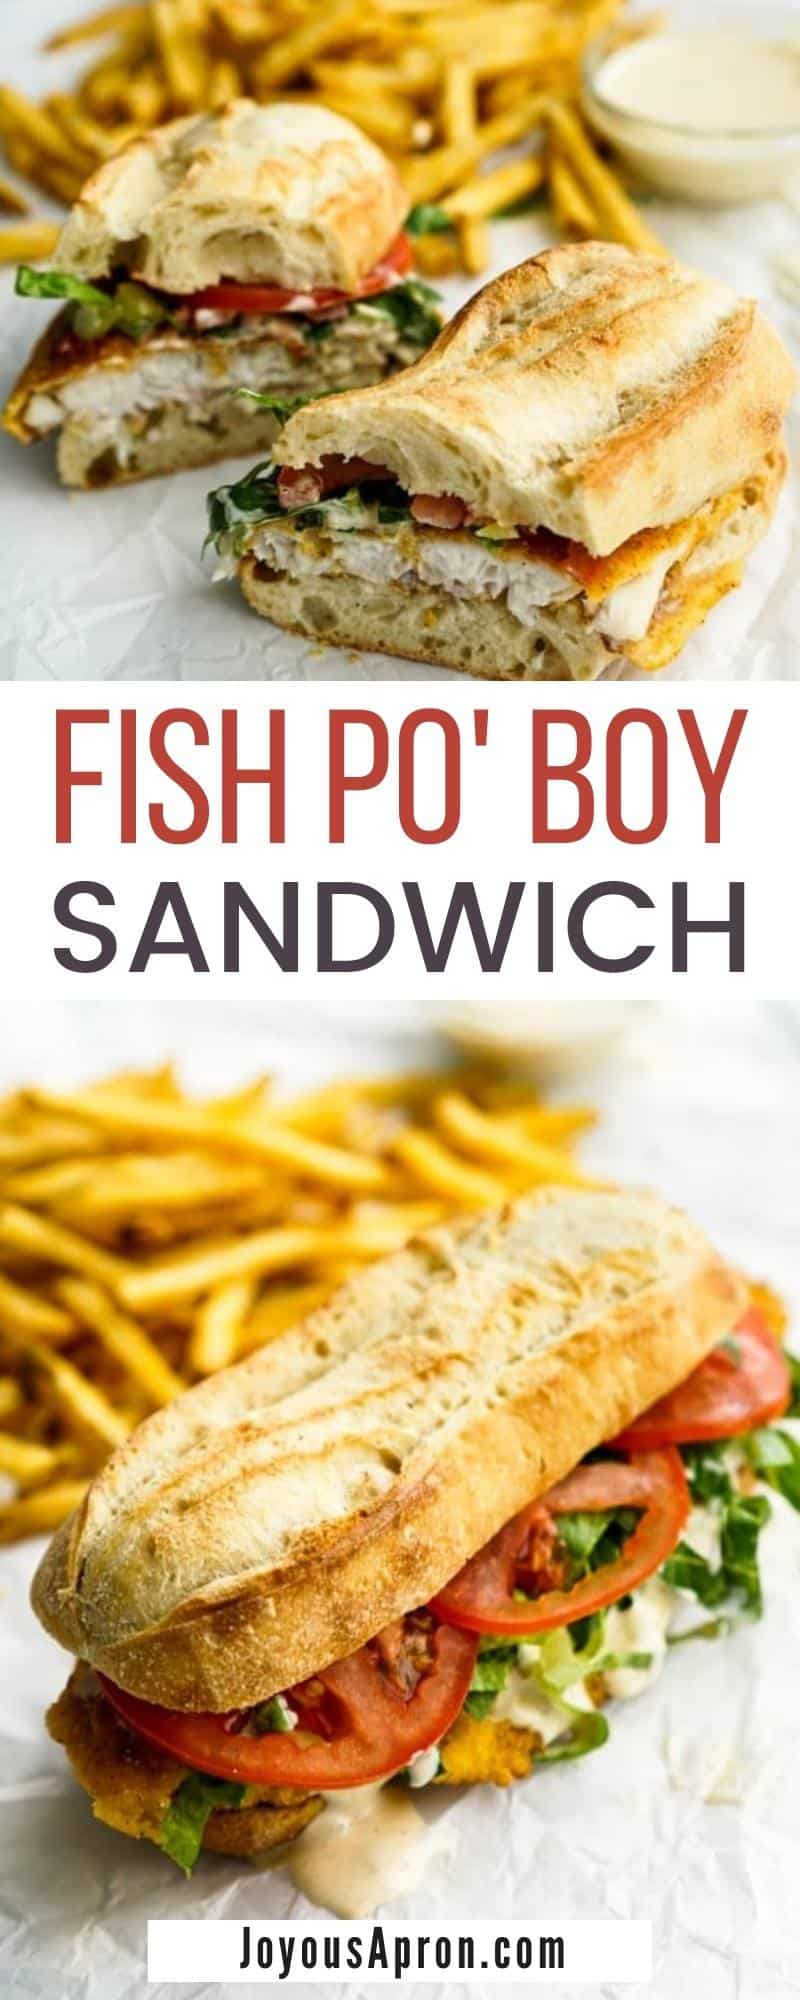 Fish Po' Bo - easy New Orlean's cajun and creole sandwich recipe! Crusty baguette loaded with fried breaded catfish, lettuce, tomatoes and an irresistible homemade remoulade. The perfect easy lunch or dinner! via @joyousapron